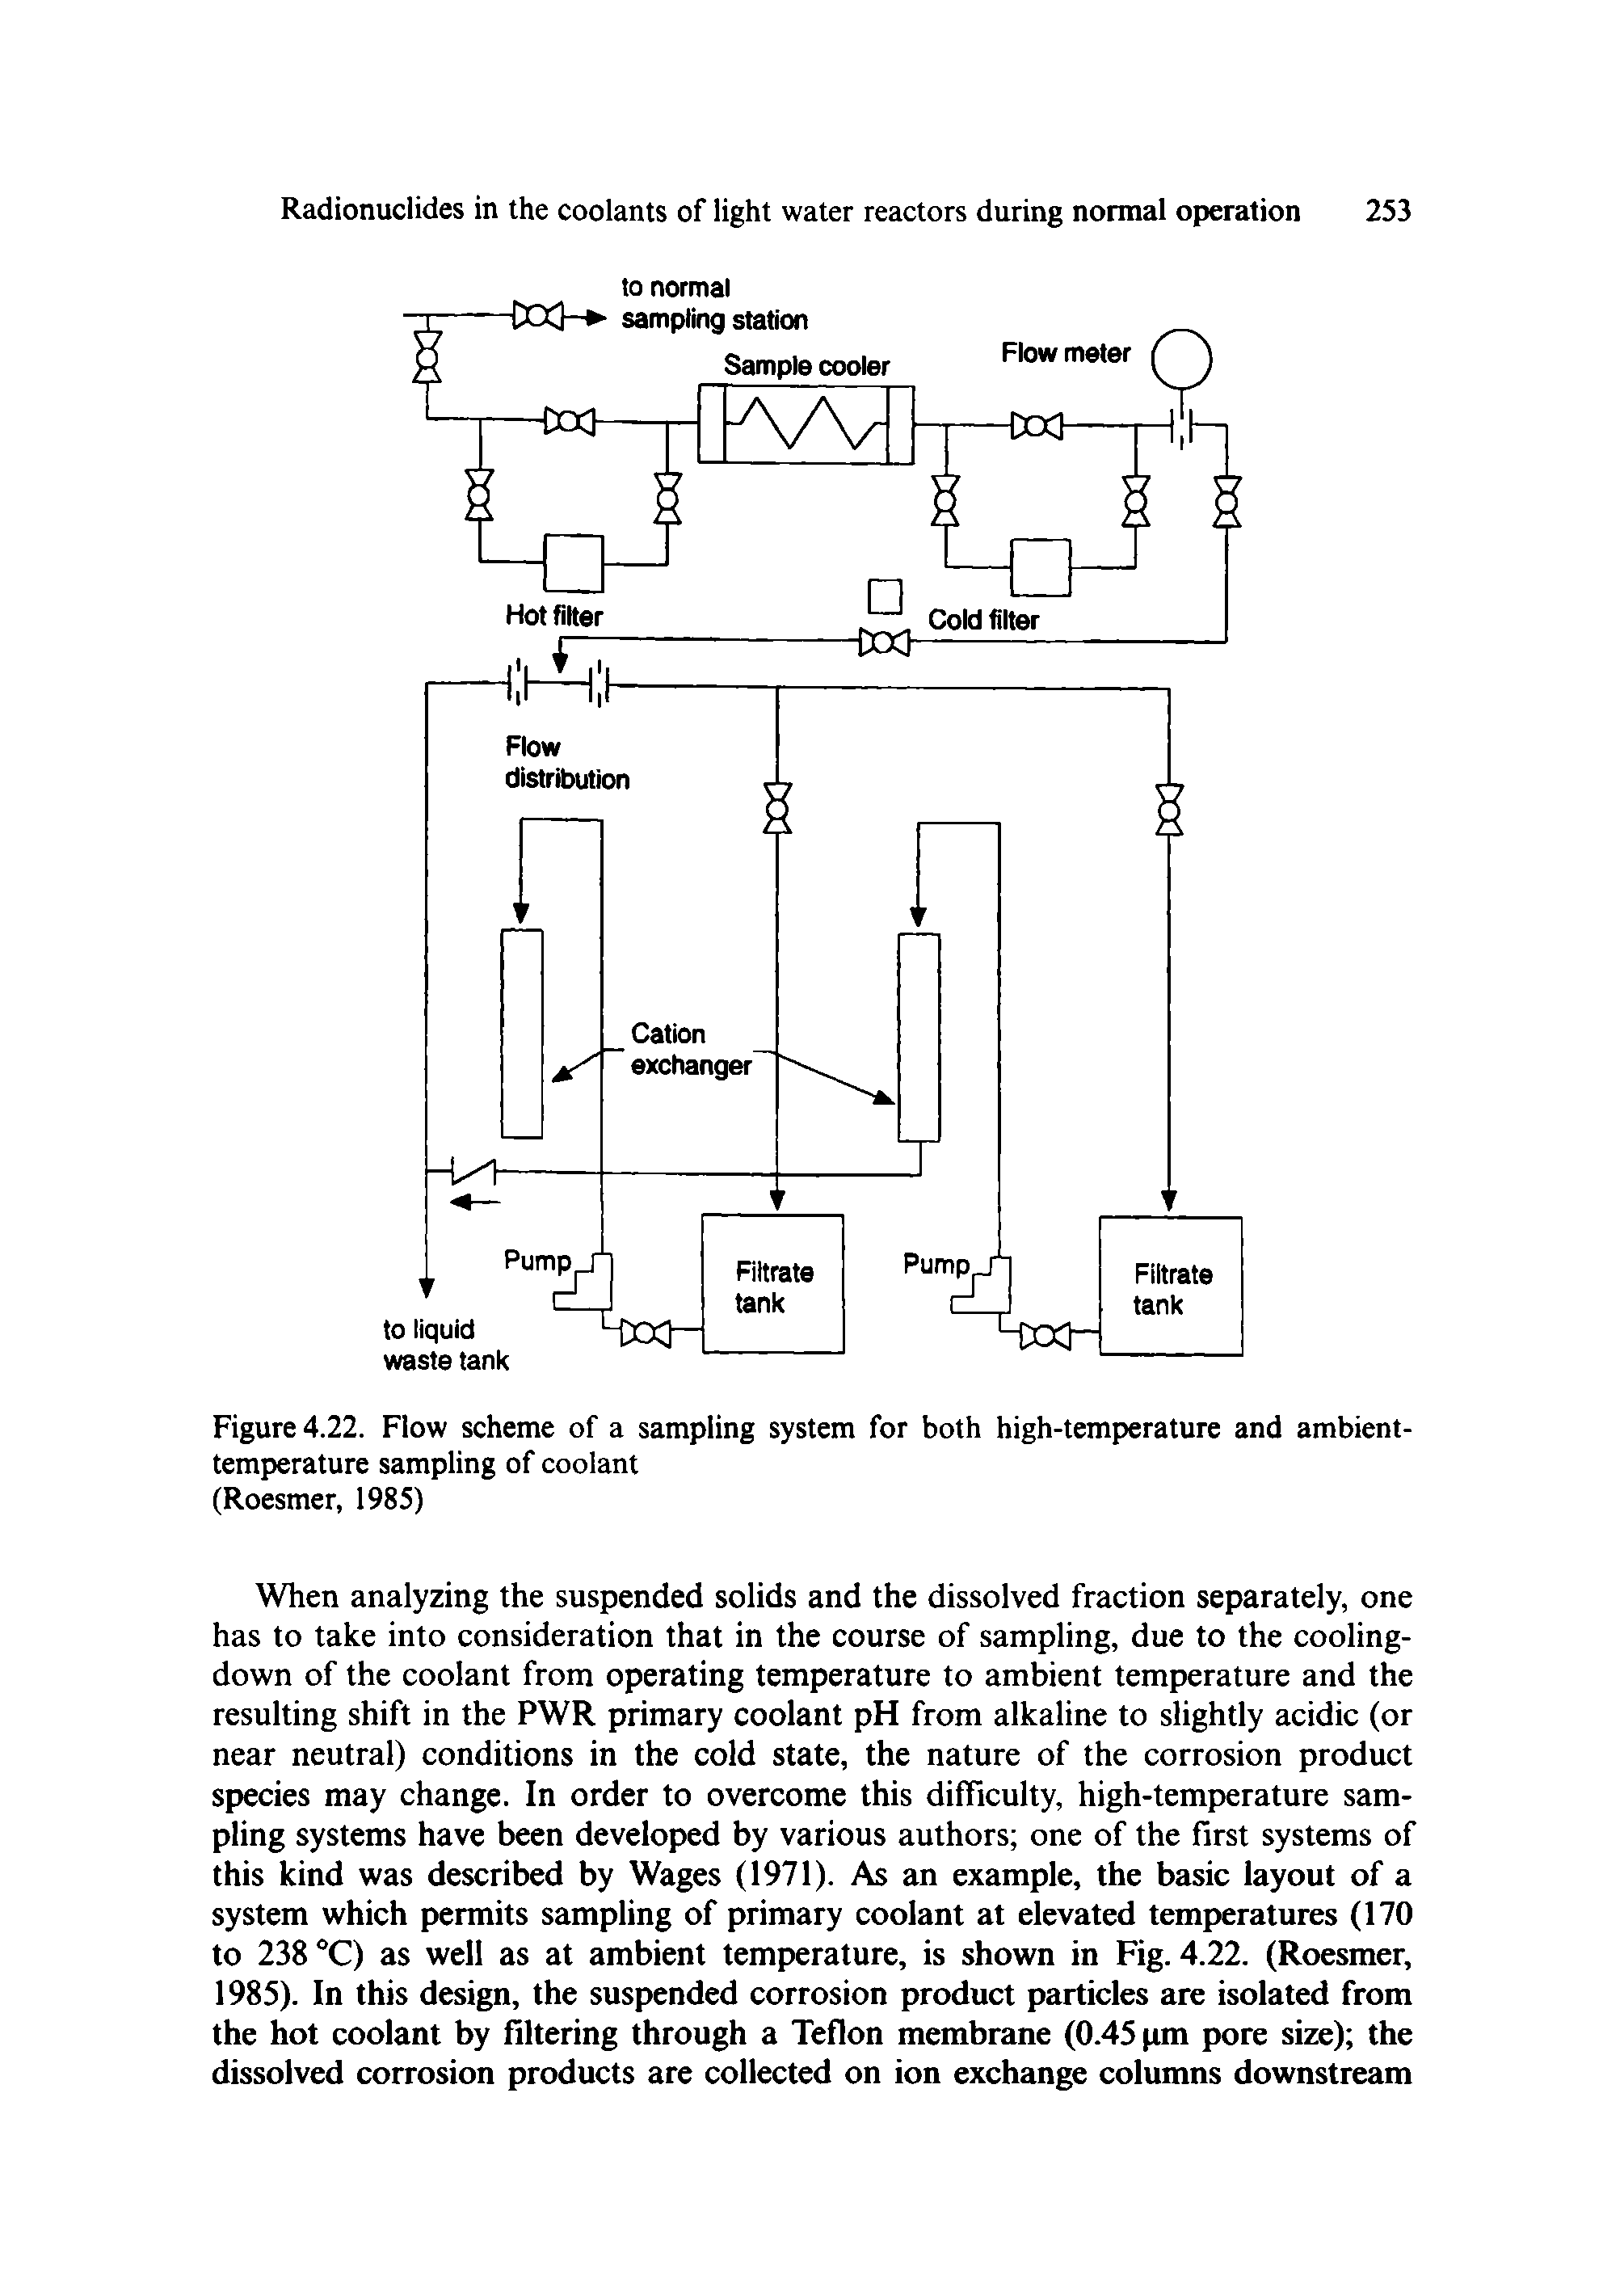 Figure 4.22. Flow scheme of a sampling system for both high-temperature and ambient-temperature sampling of coolant (Roesmer, 1985)...